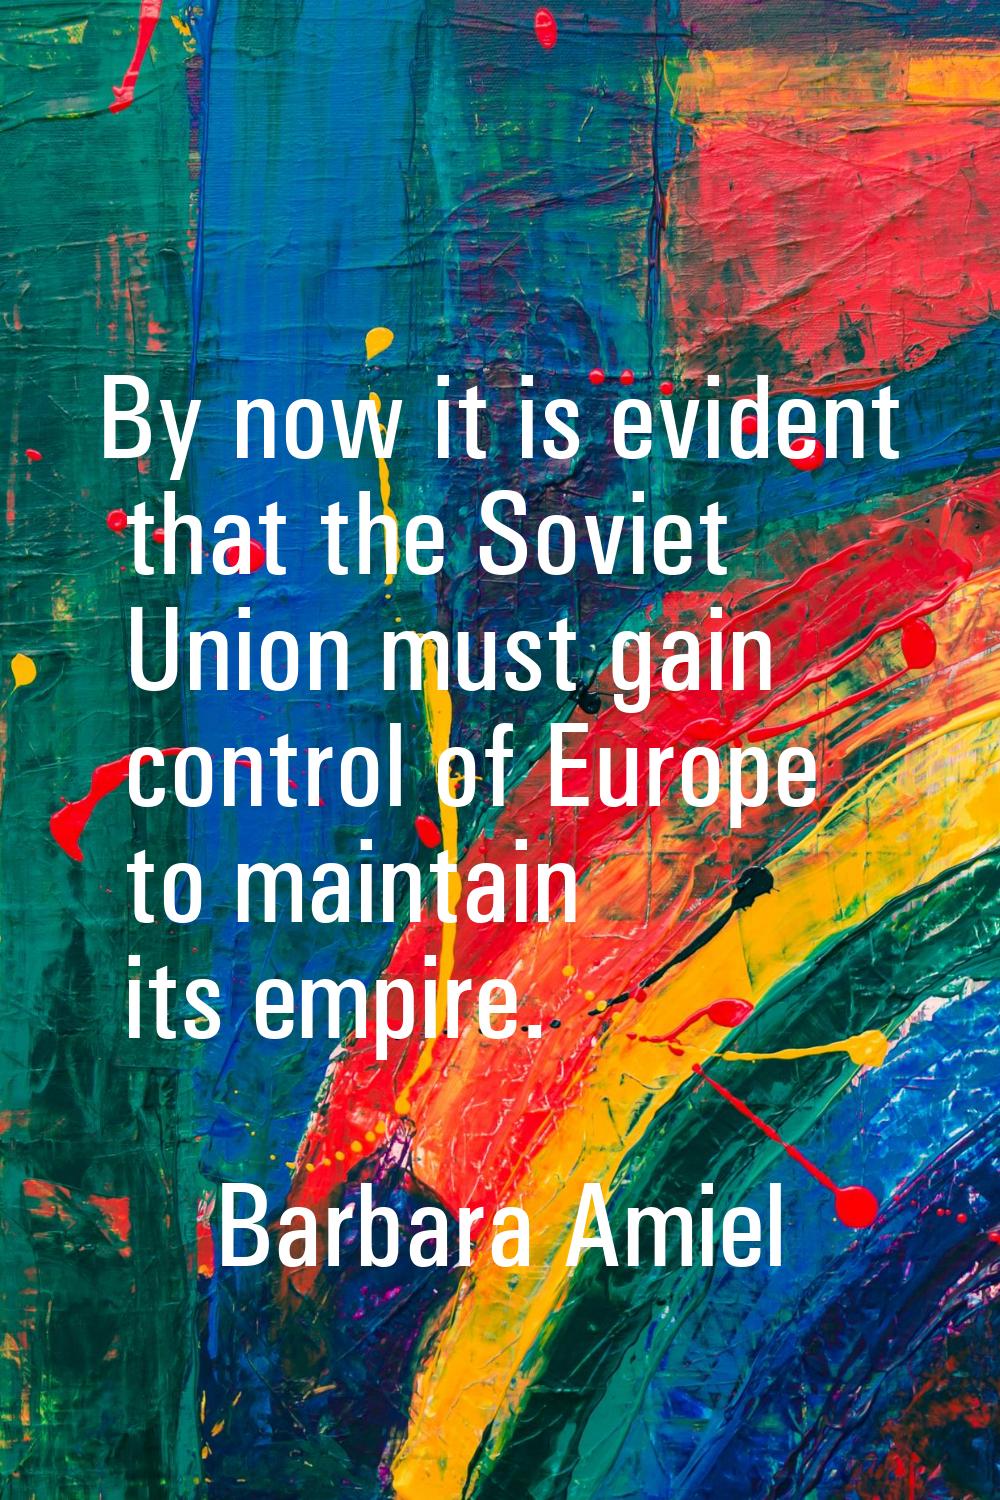 By now it is evident that the Soviet Union must gain control of Europe to maintain its empire.